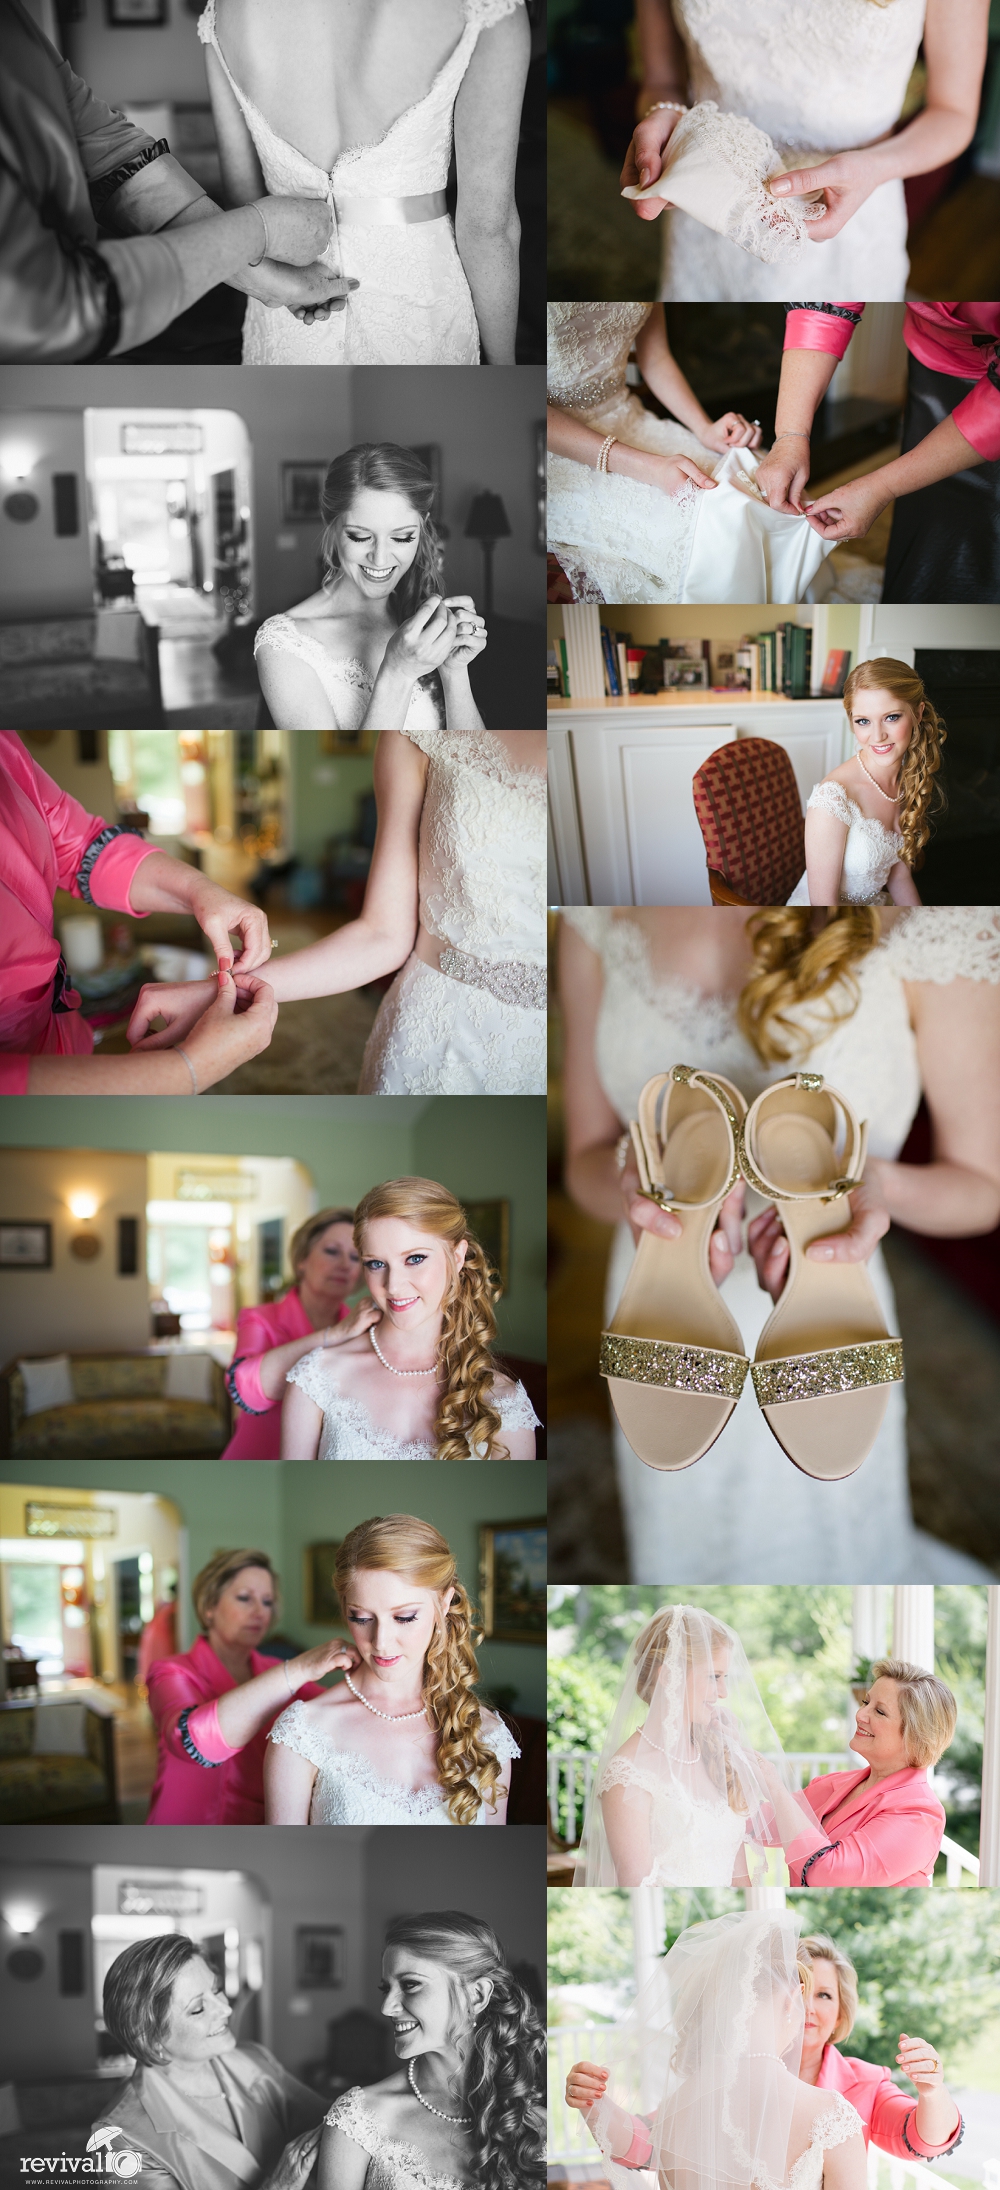 Bride getting ready with mother Photos by Revival Photography Wedding at the Highland Lake Inn in Flat Rock NC Wedding Photos by www.revivalphotography.com